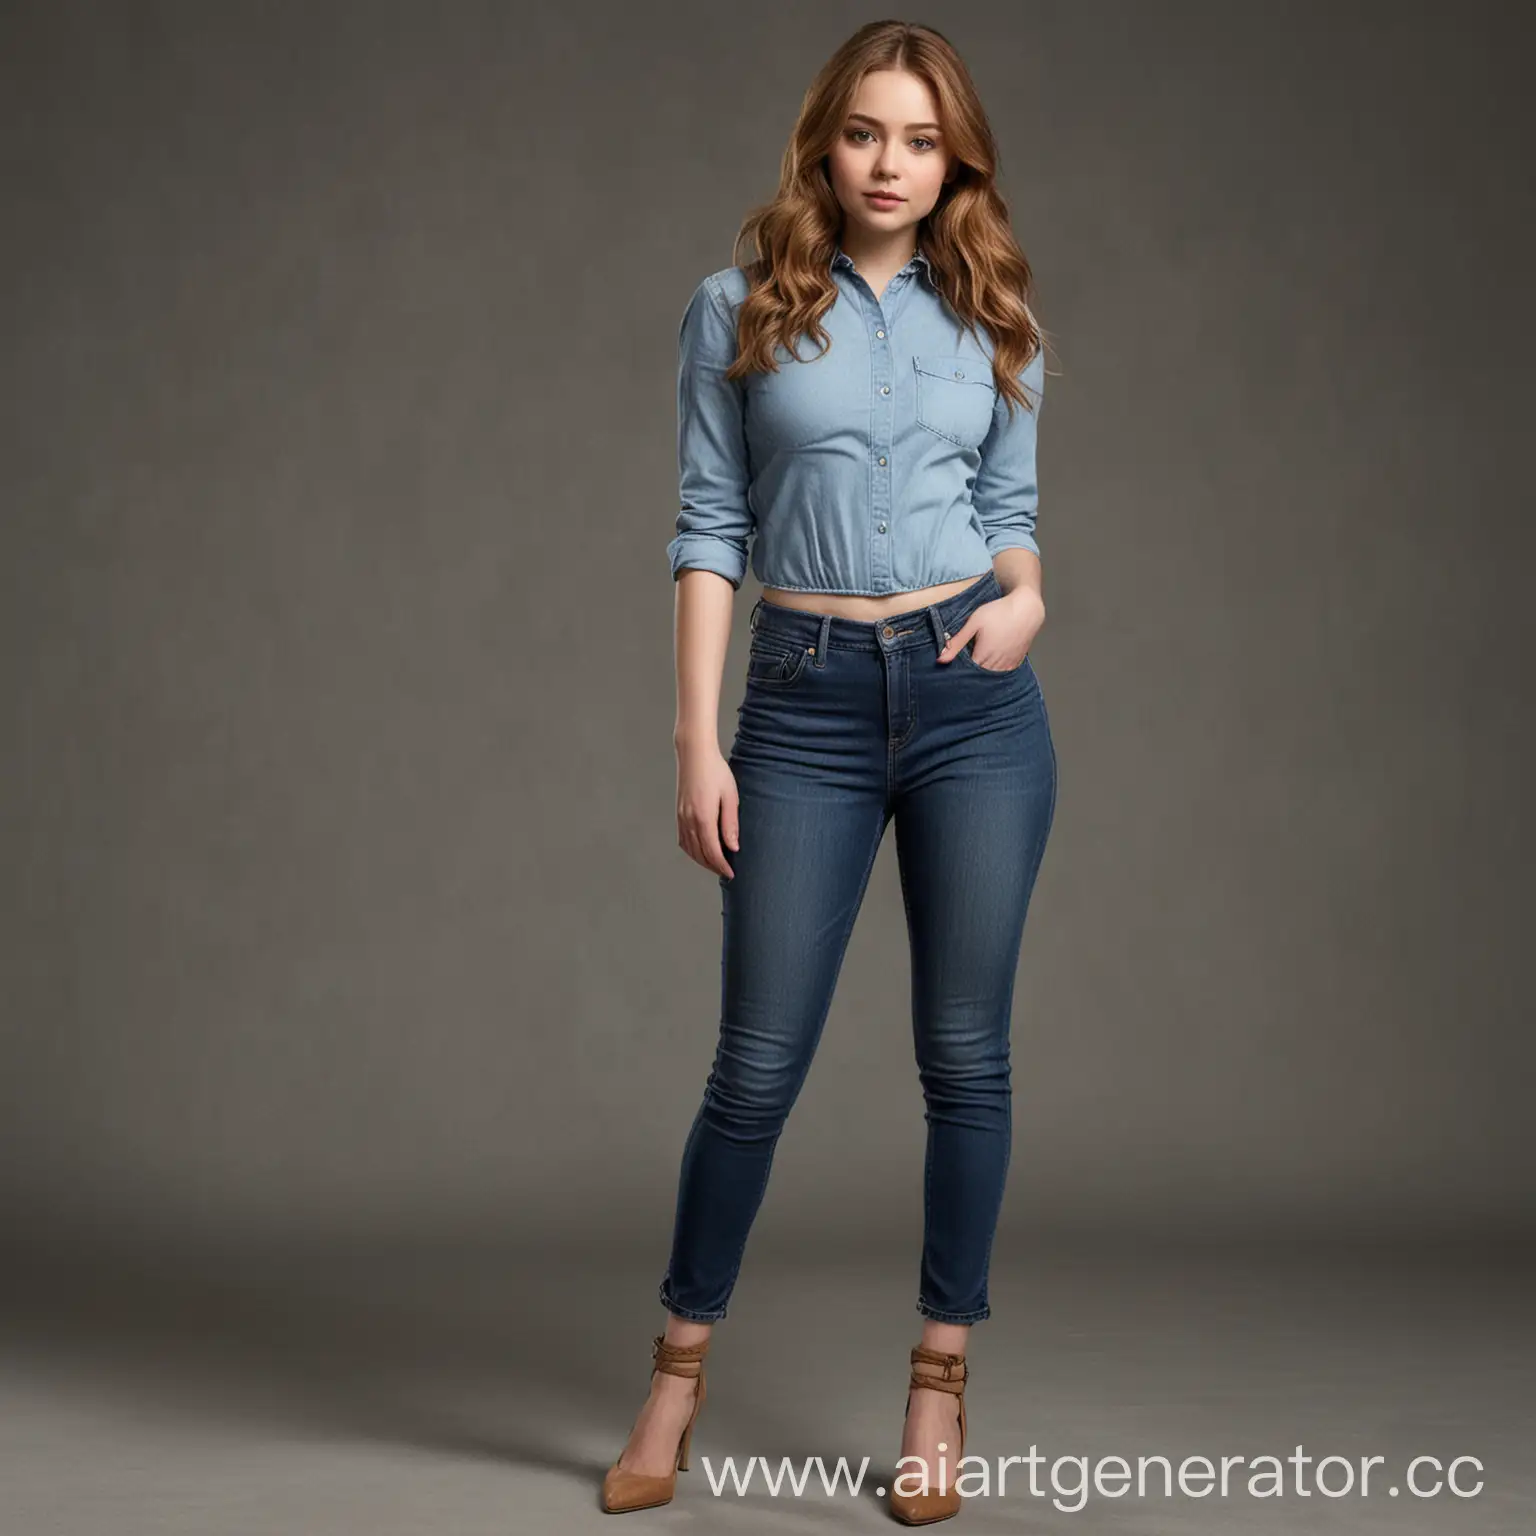 Elegant-28YearOld-Woman-with-Chestnut-Hair-in-Fitted-Jeans